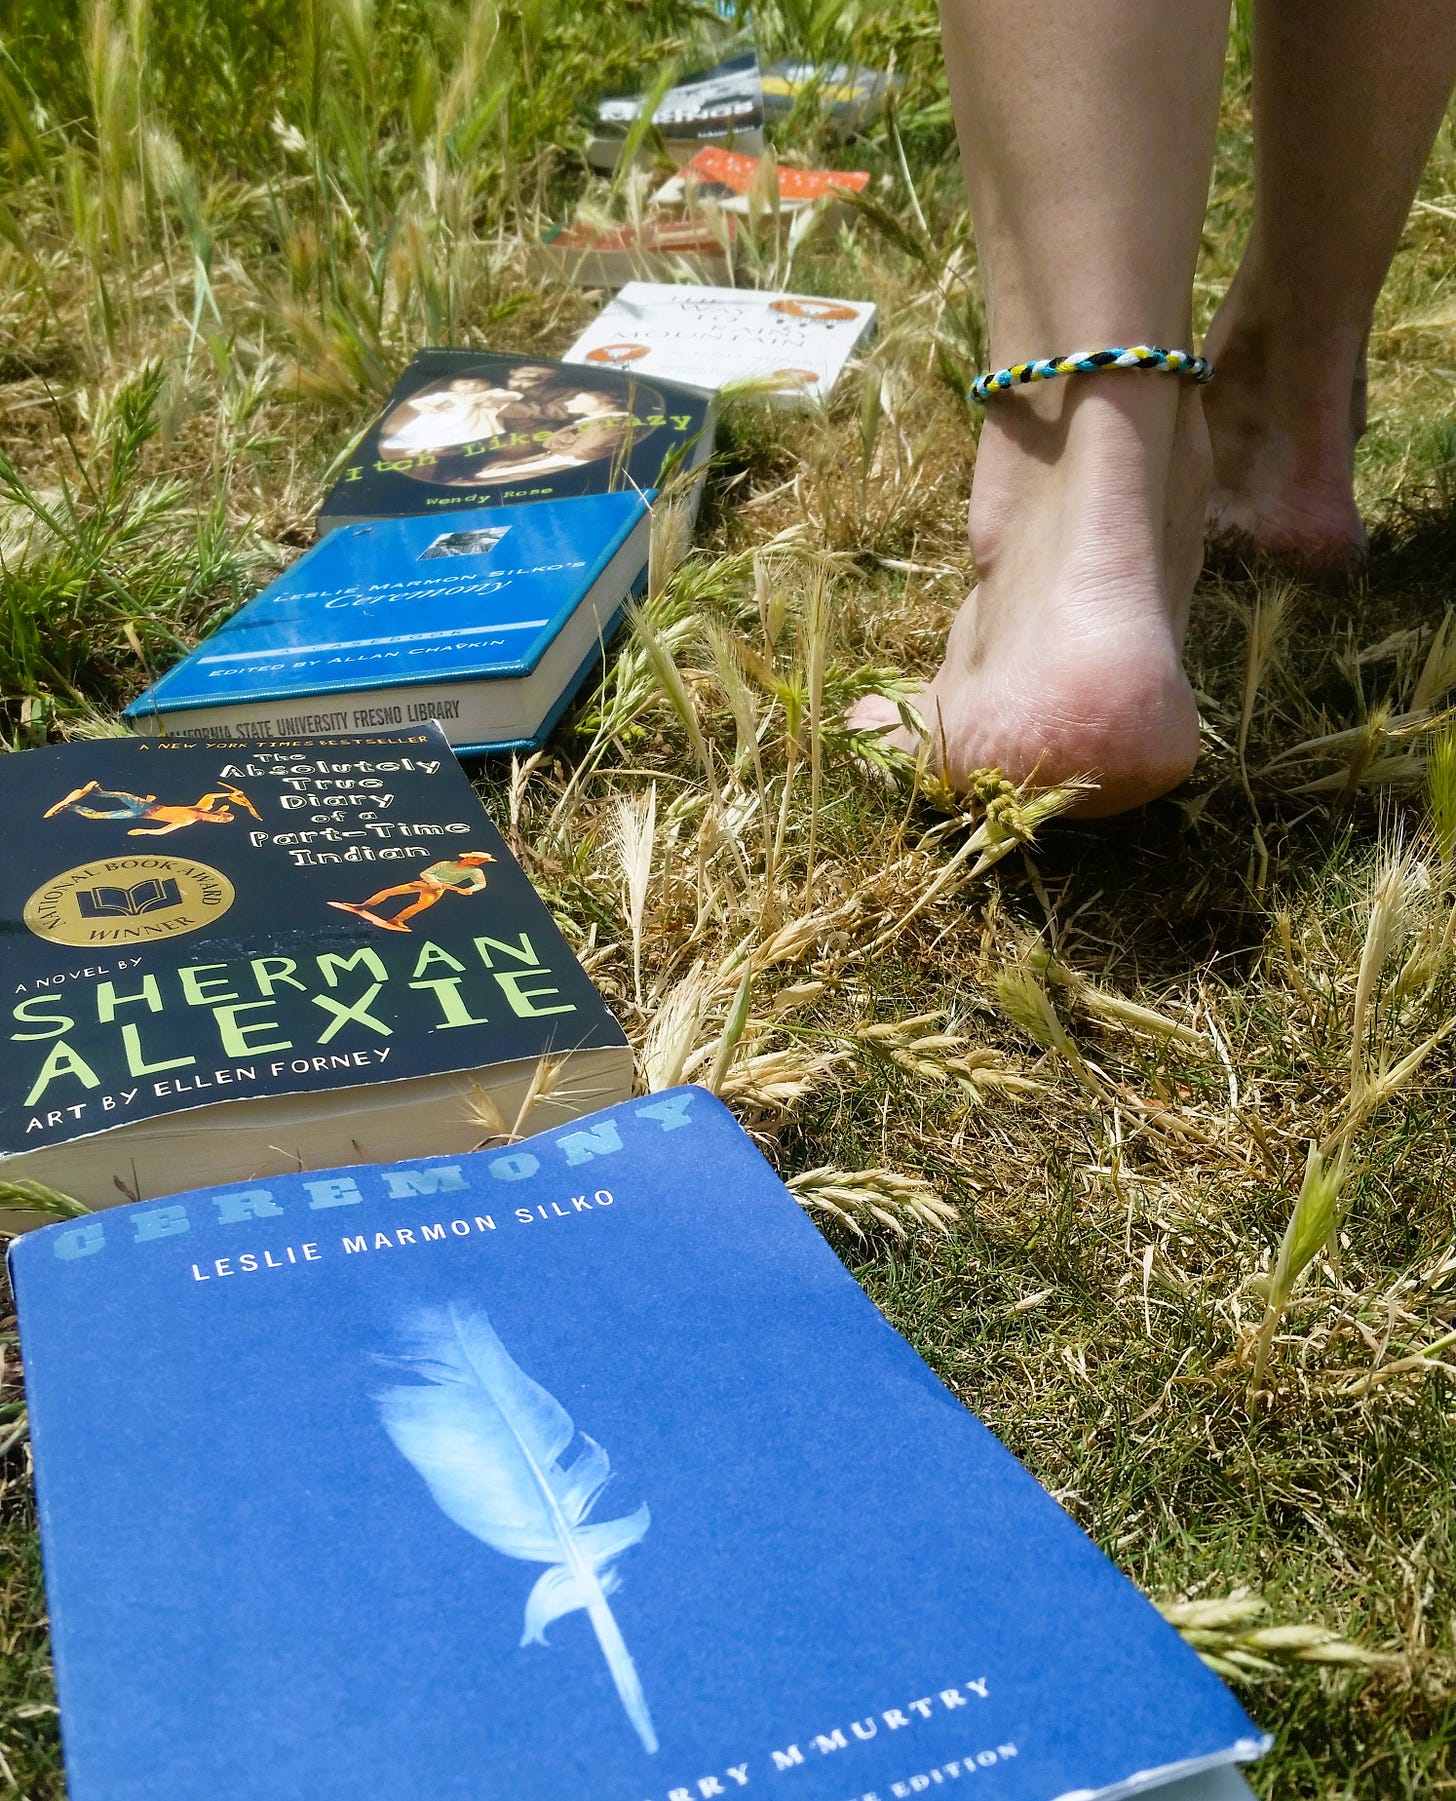 Feet of a young person walking along a path of books in grass